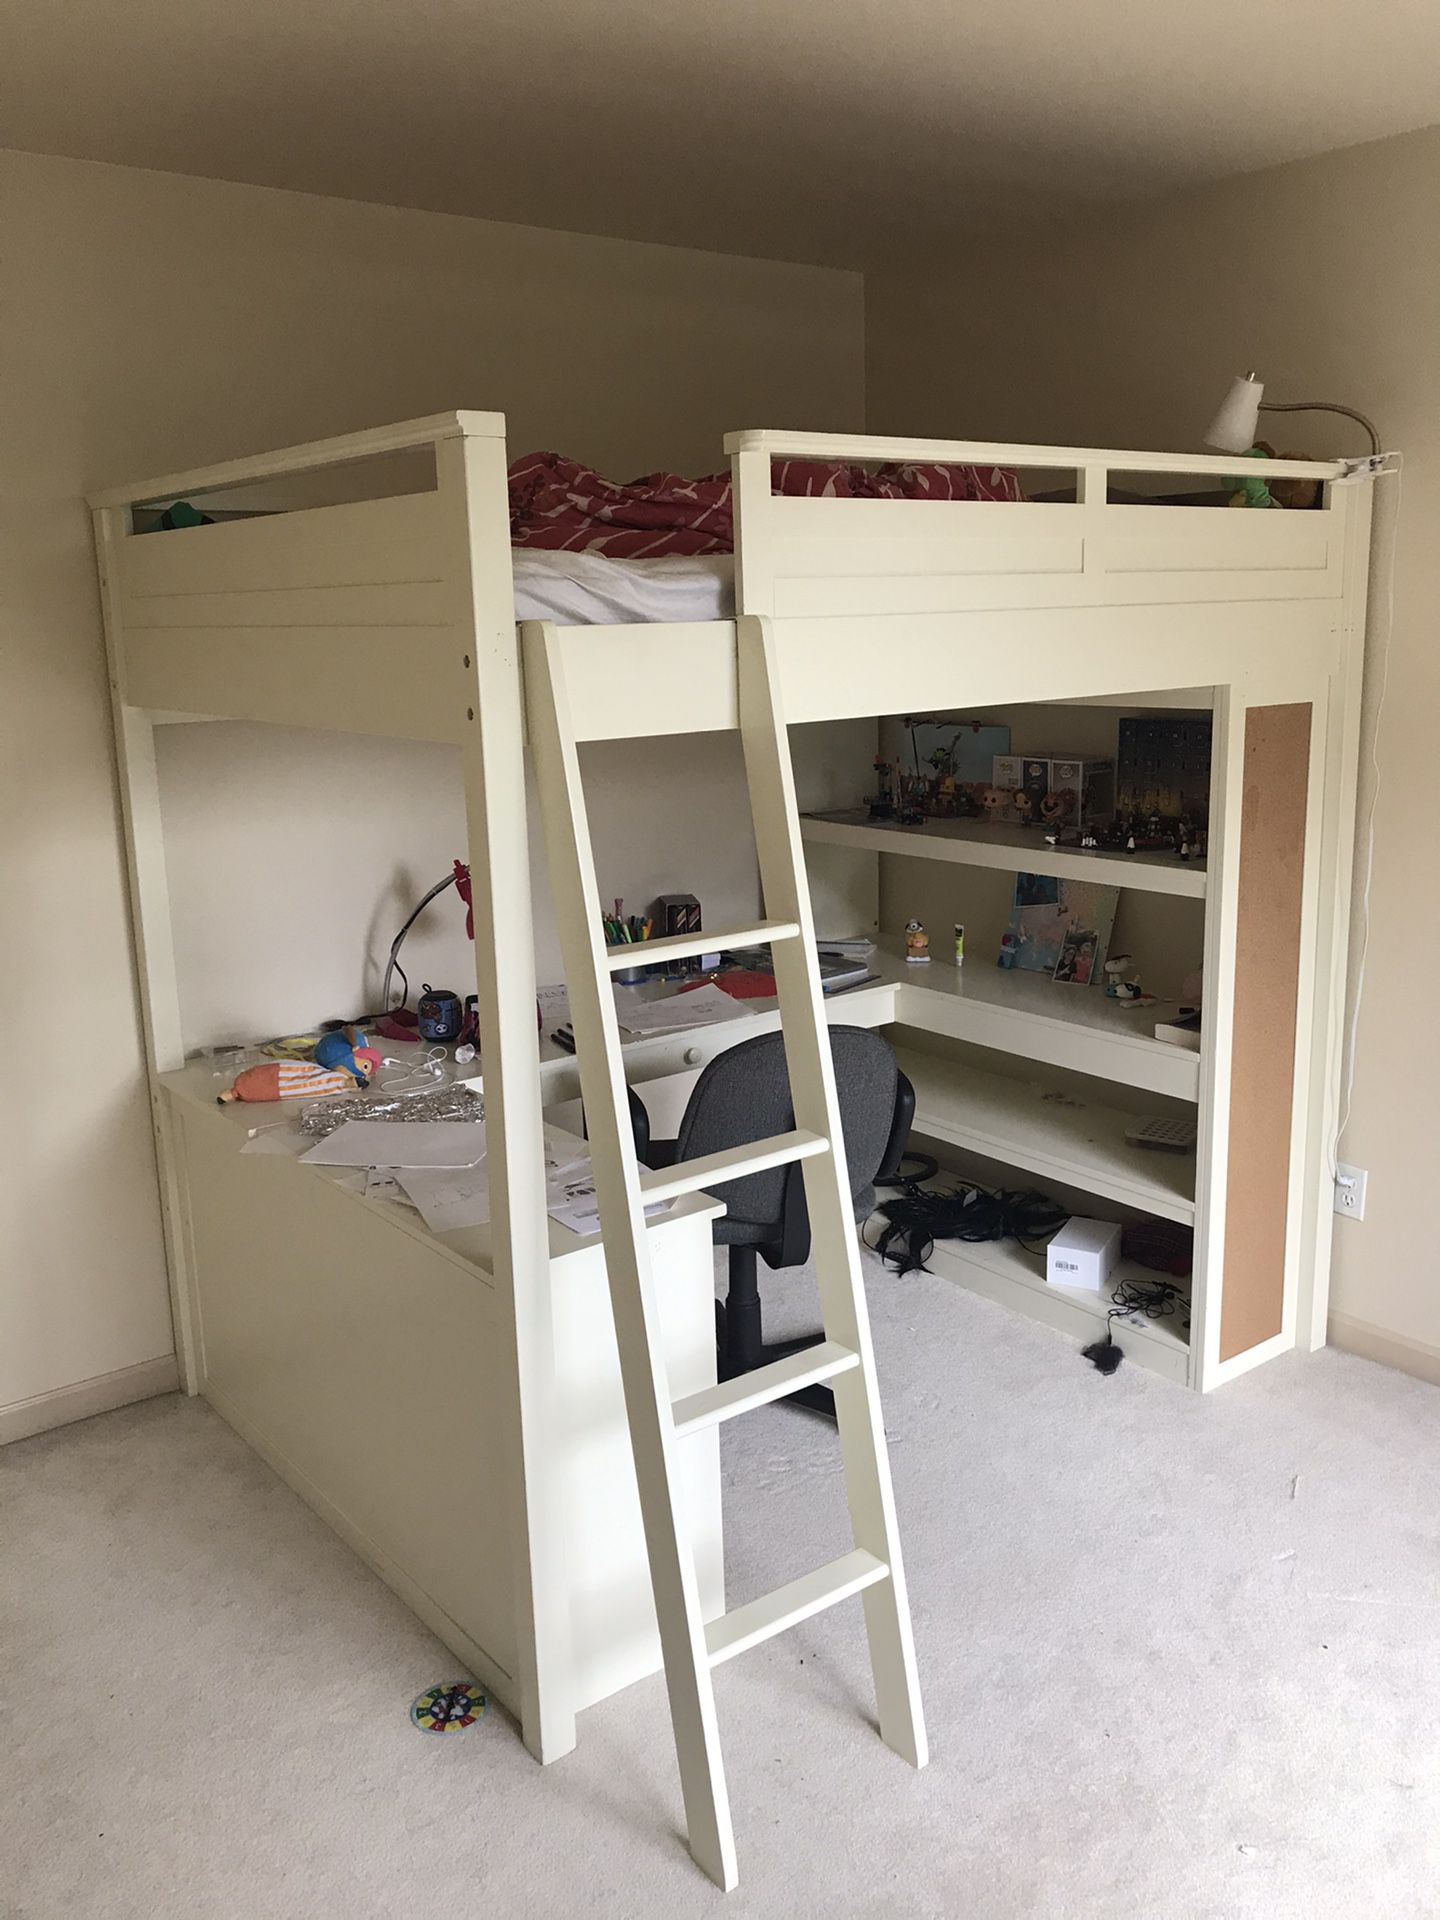 Bunk bed with mattress